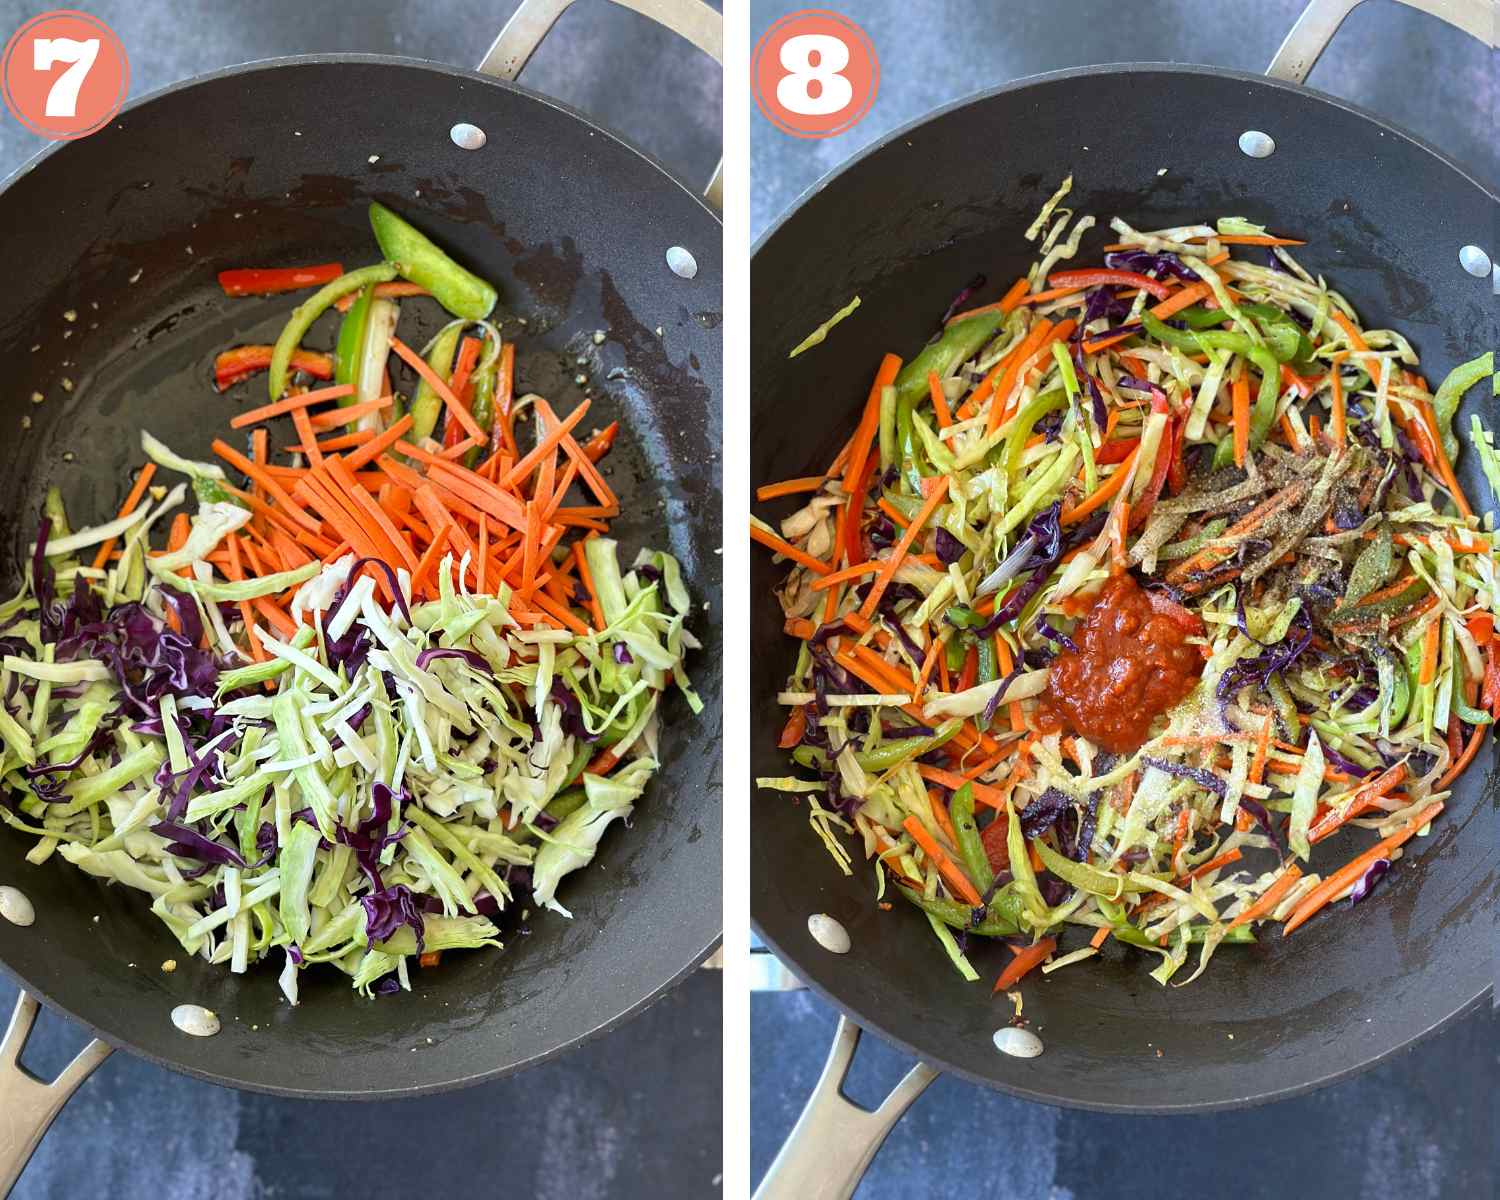 Collage steps to make Schezwan noodles; adding vegetables and sauces, then cooking for a few minutes in a wok. 